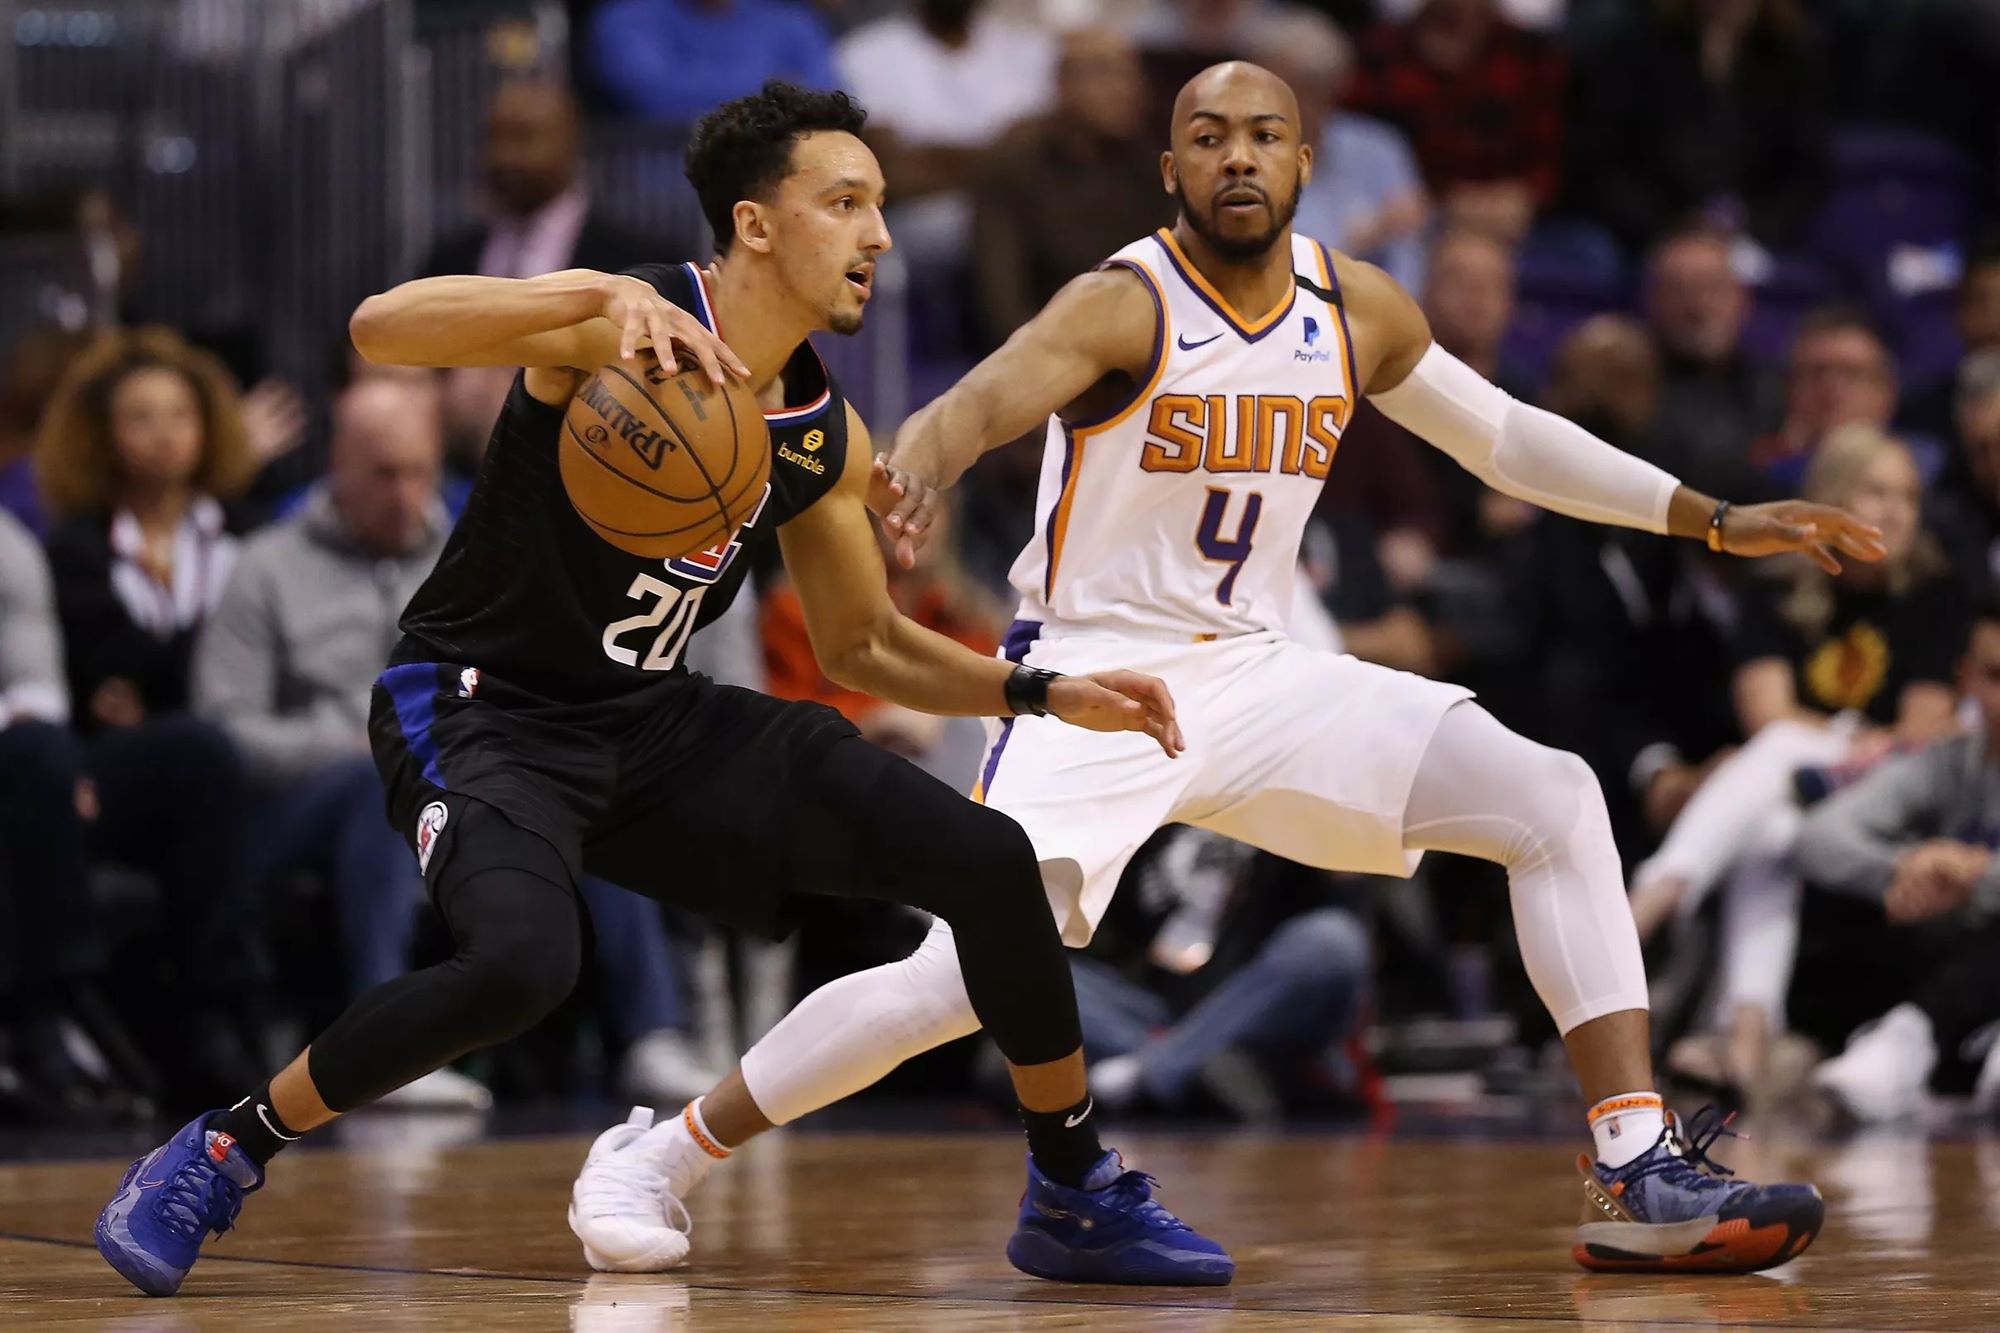 How To Watch Suns Vs Clippers